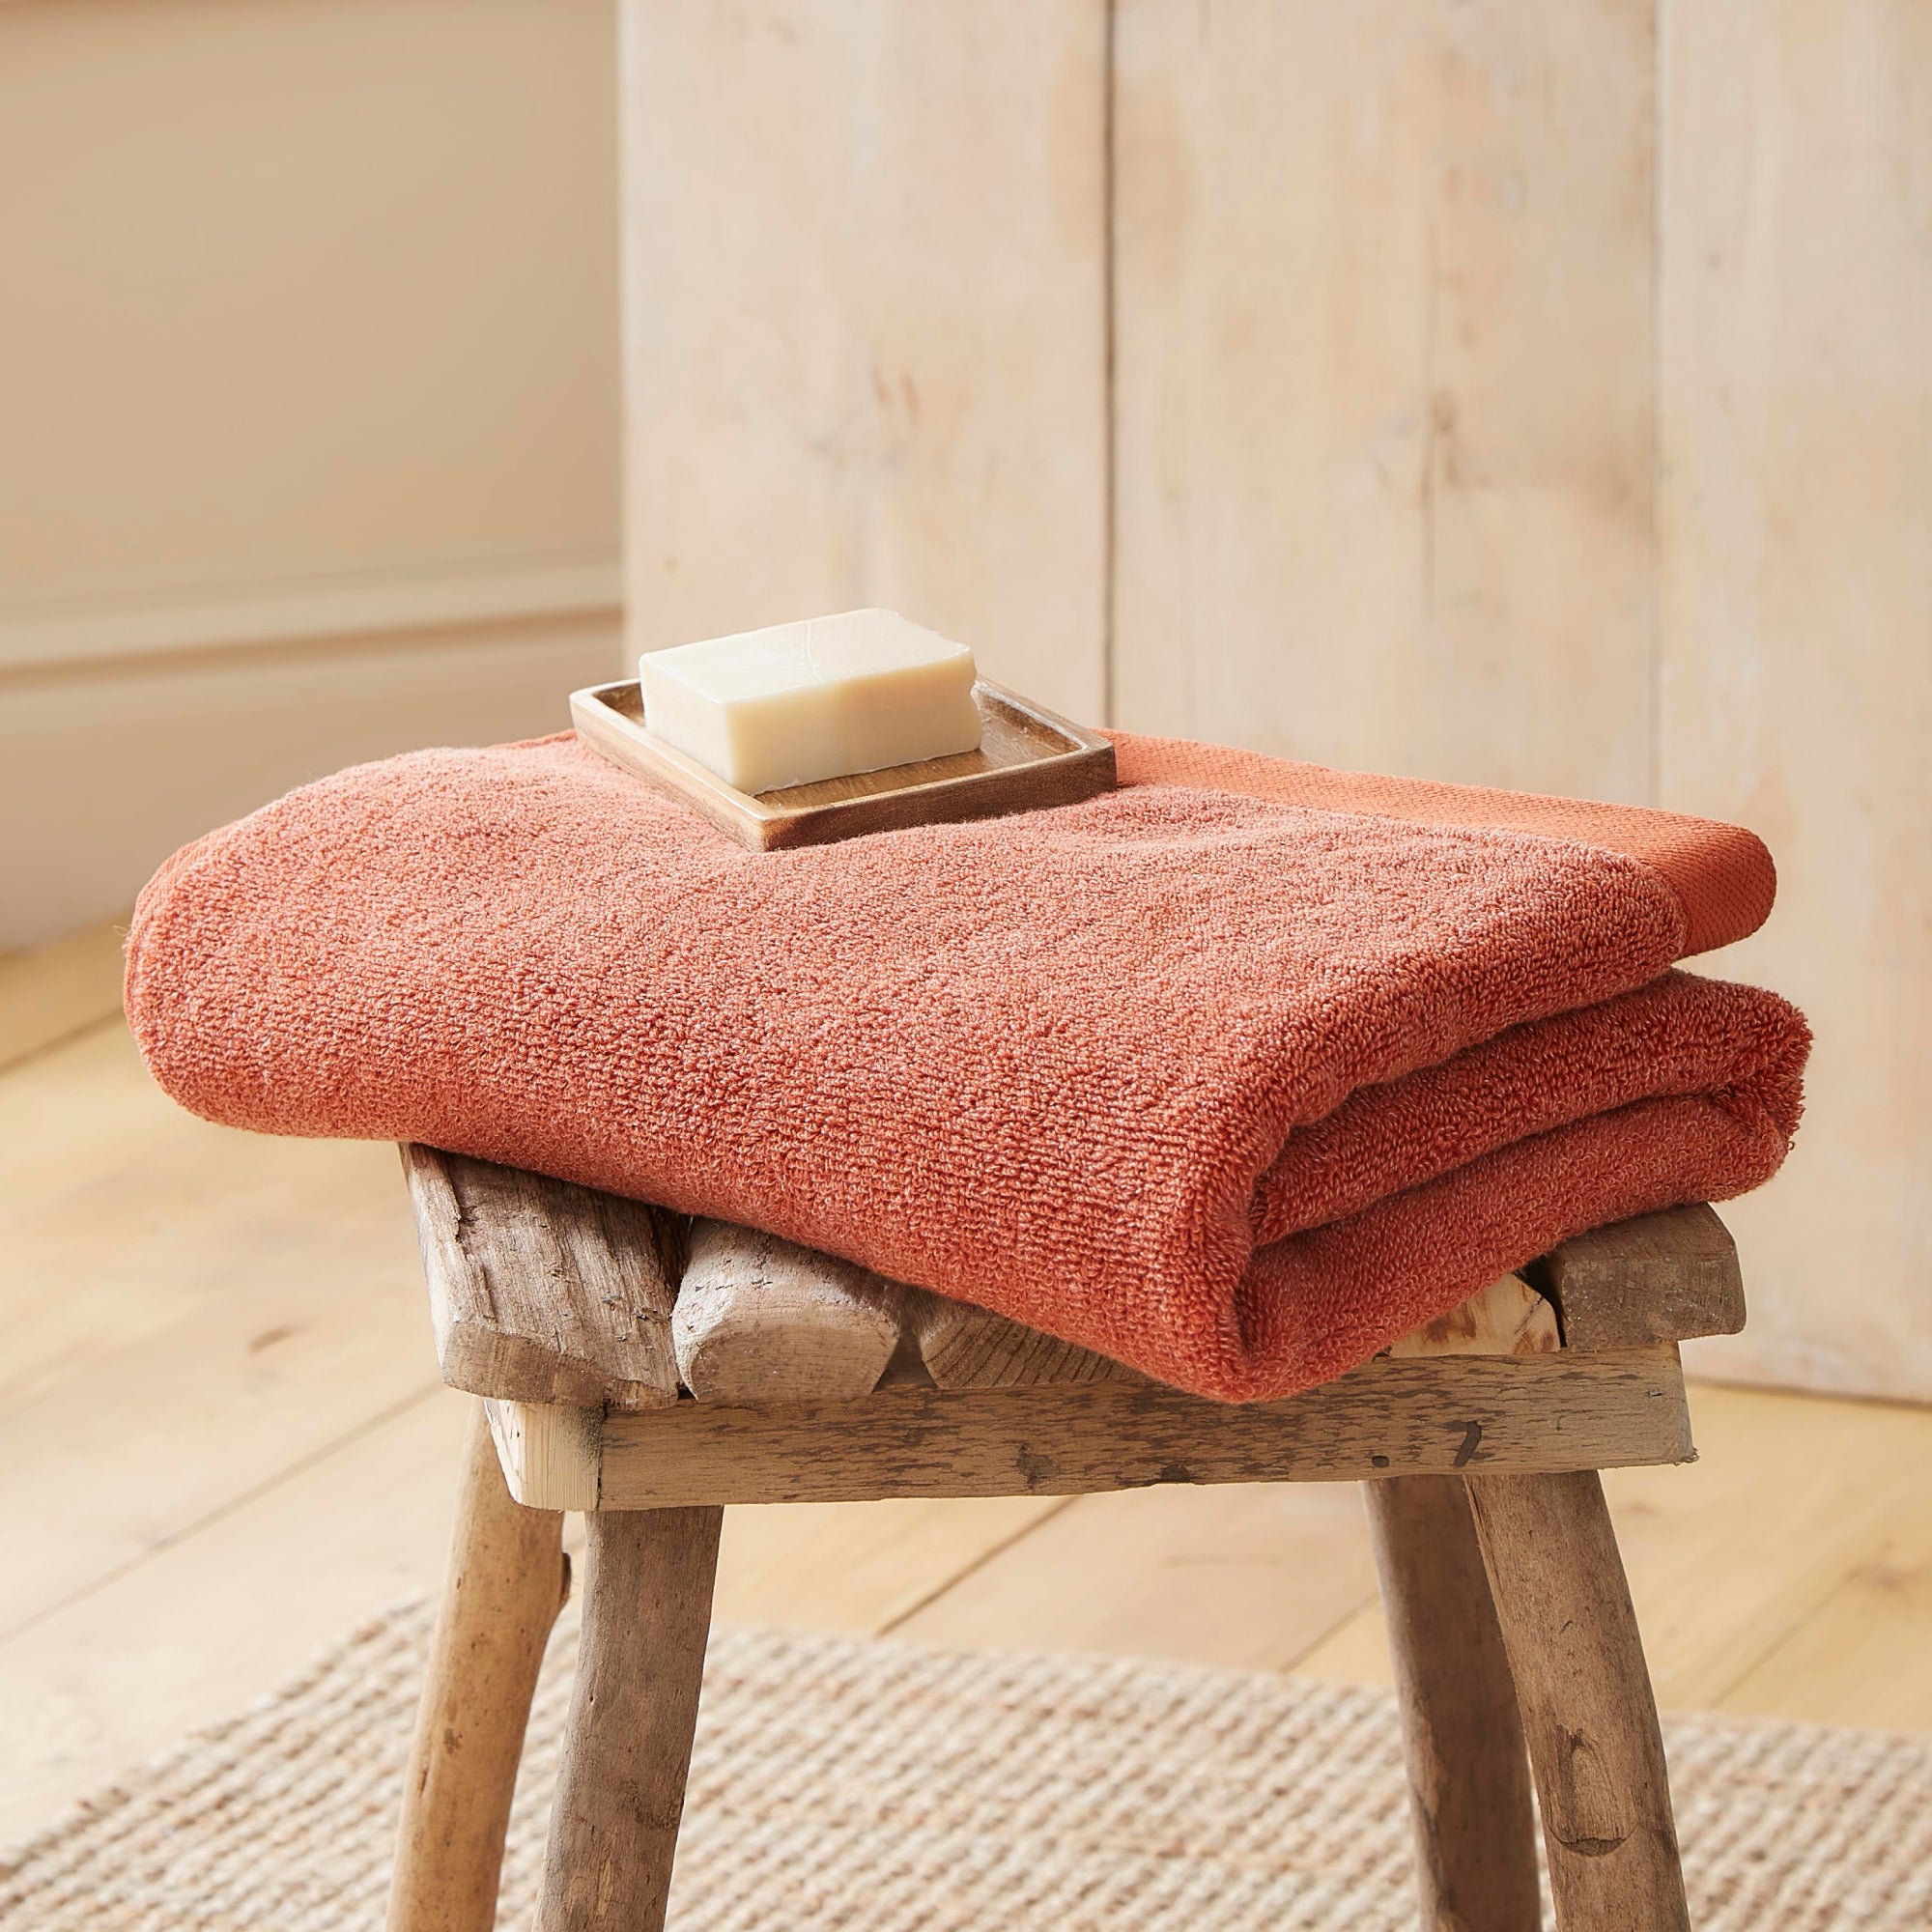 Hand Towel (2 pack) Abode Eco by Drift Home in Terracotta